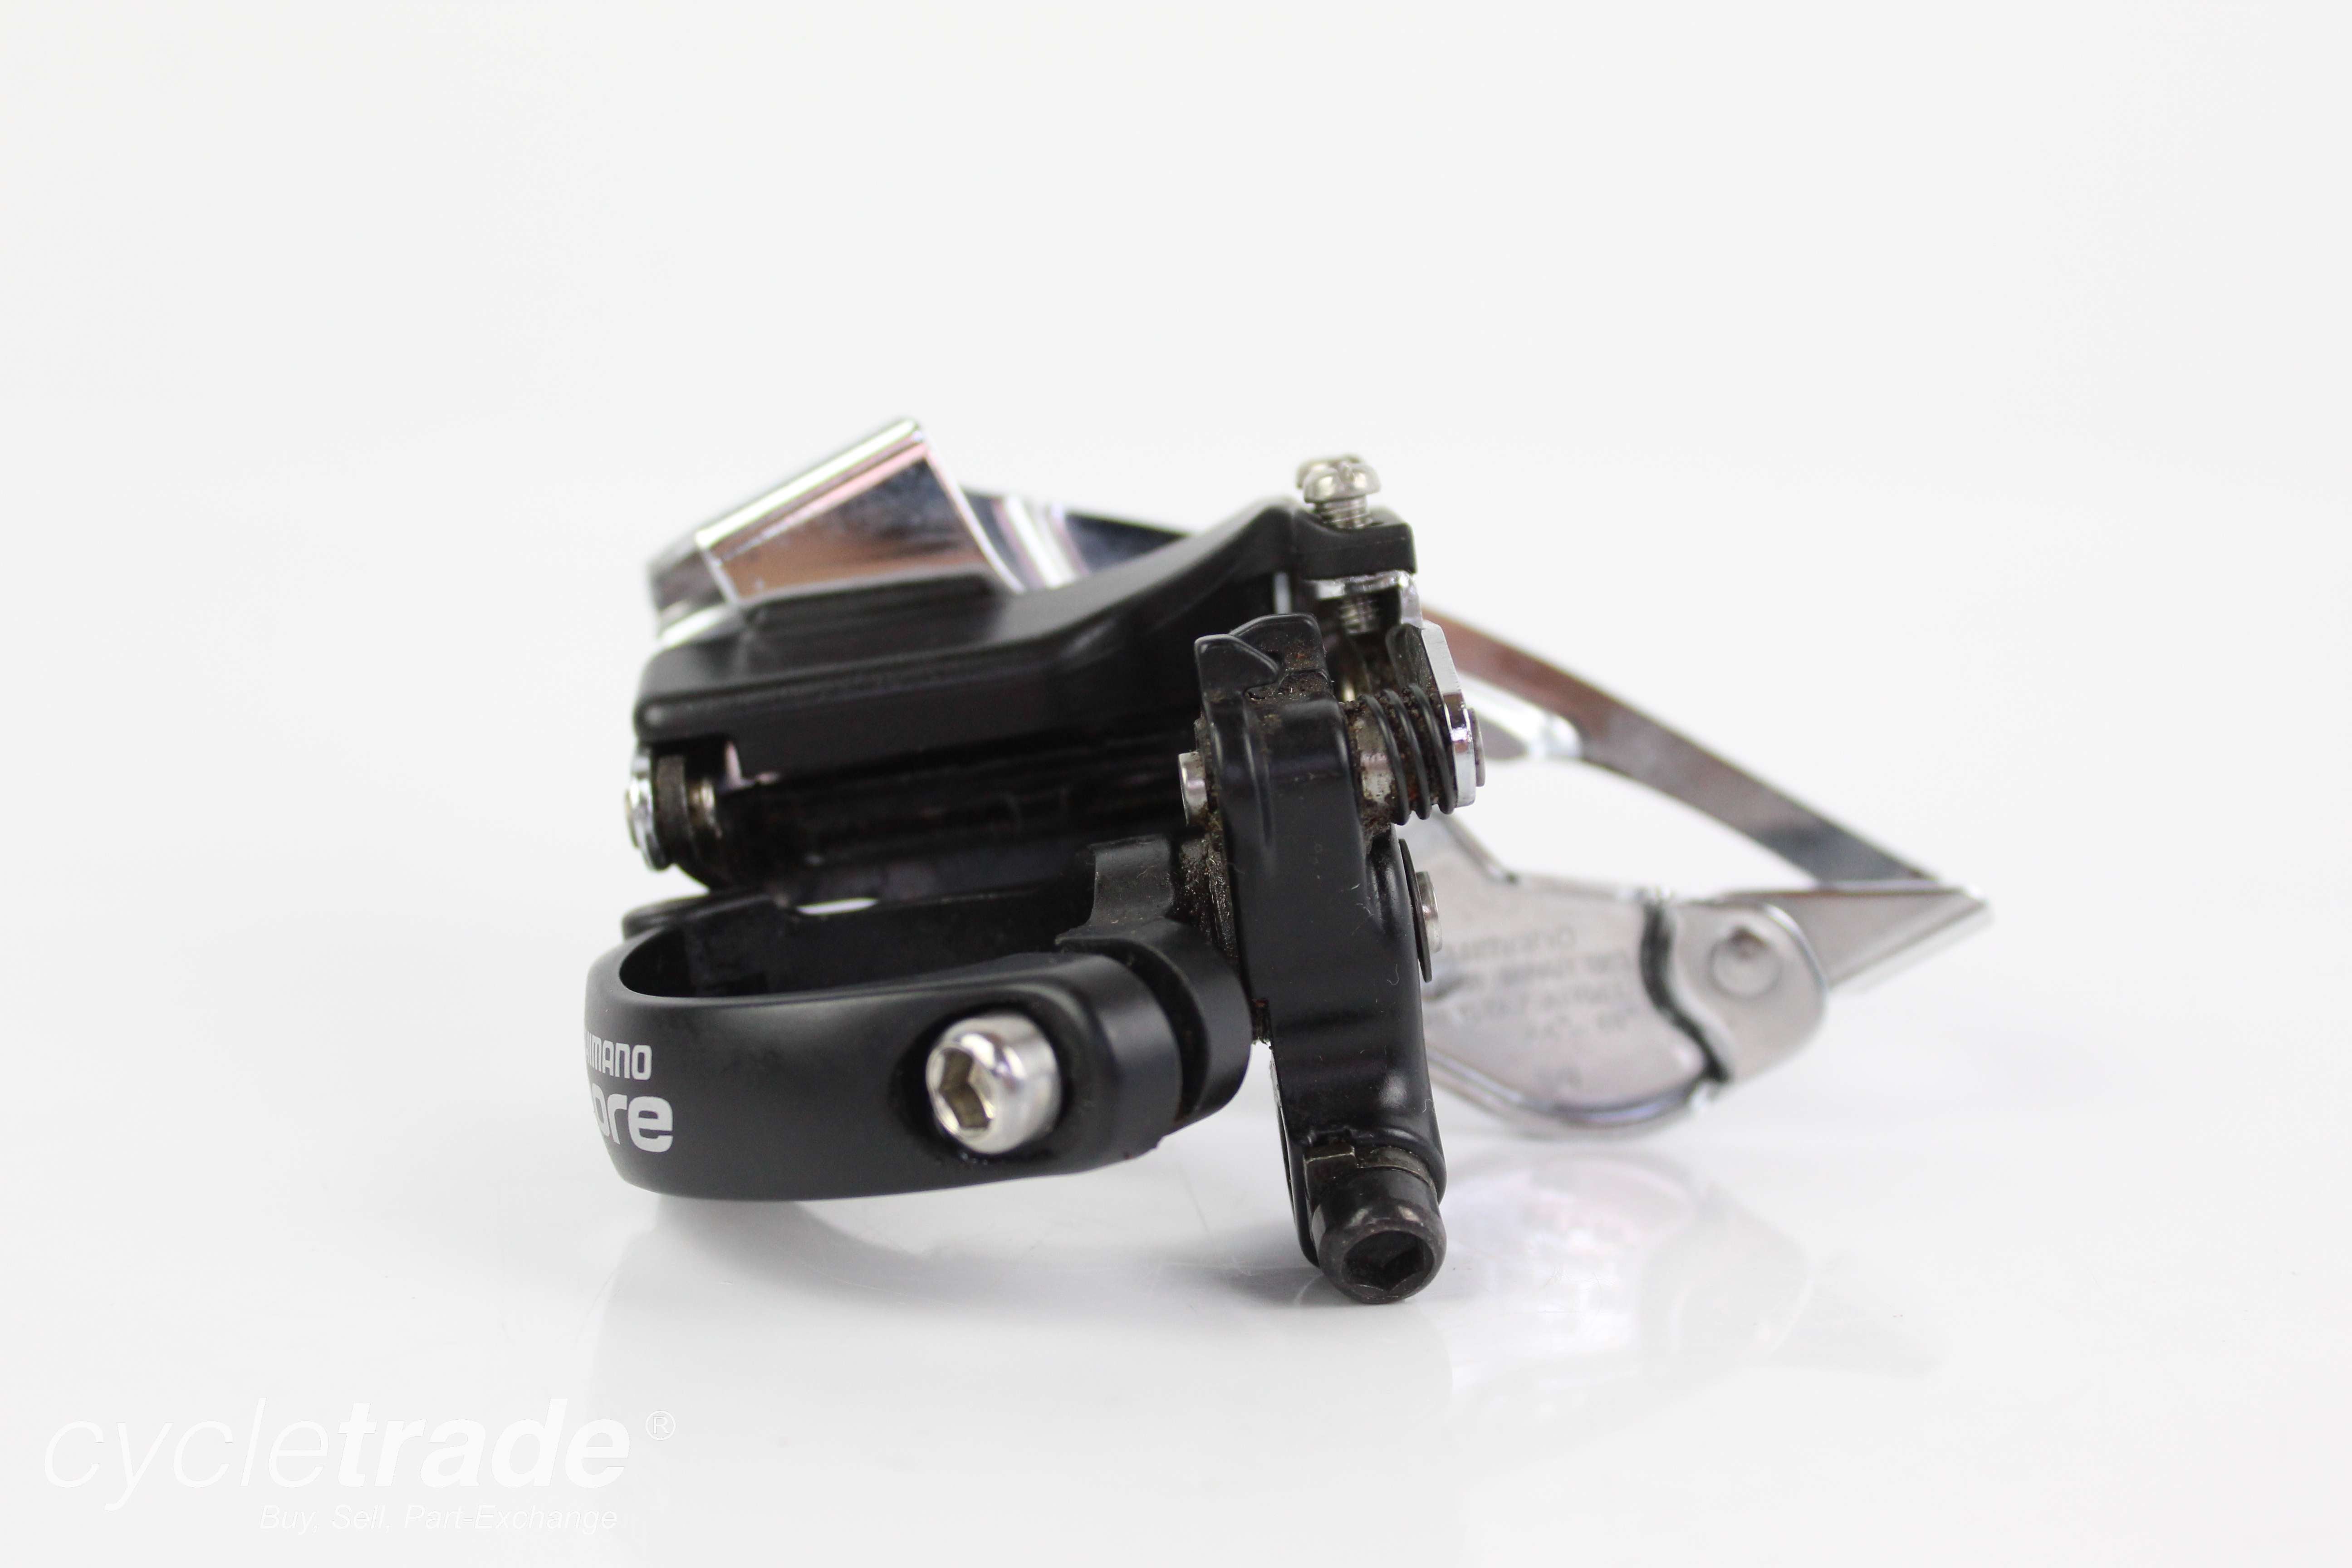 Front Derailleur- Shimano Deore FD-M530 3x9 Speed 34.9mm Clamp - Grade B